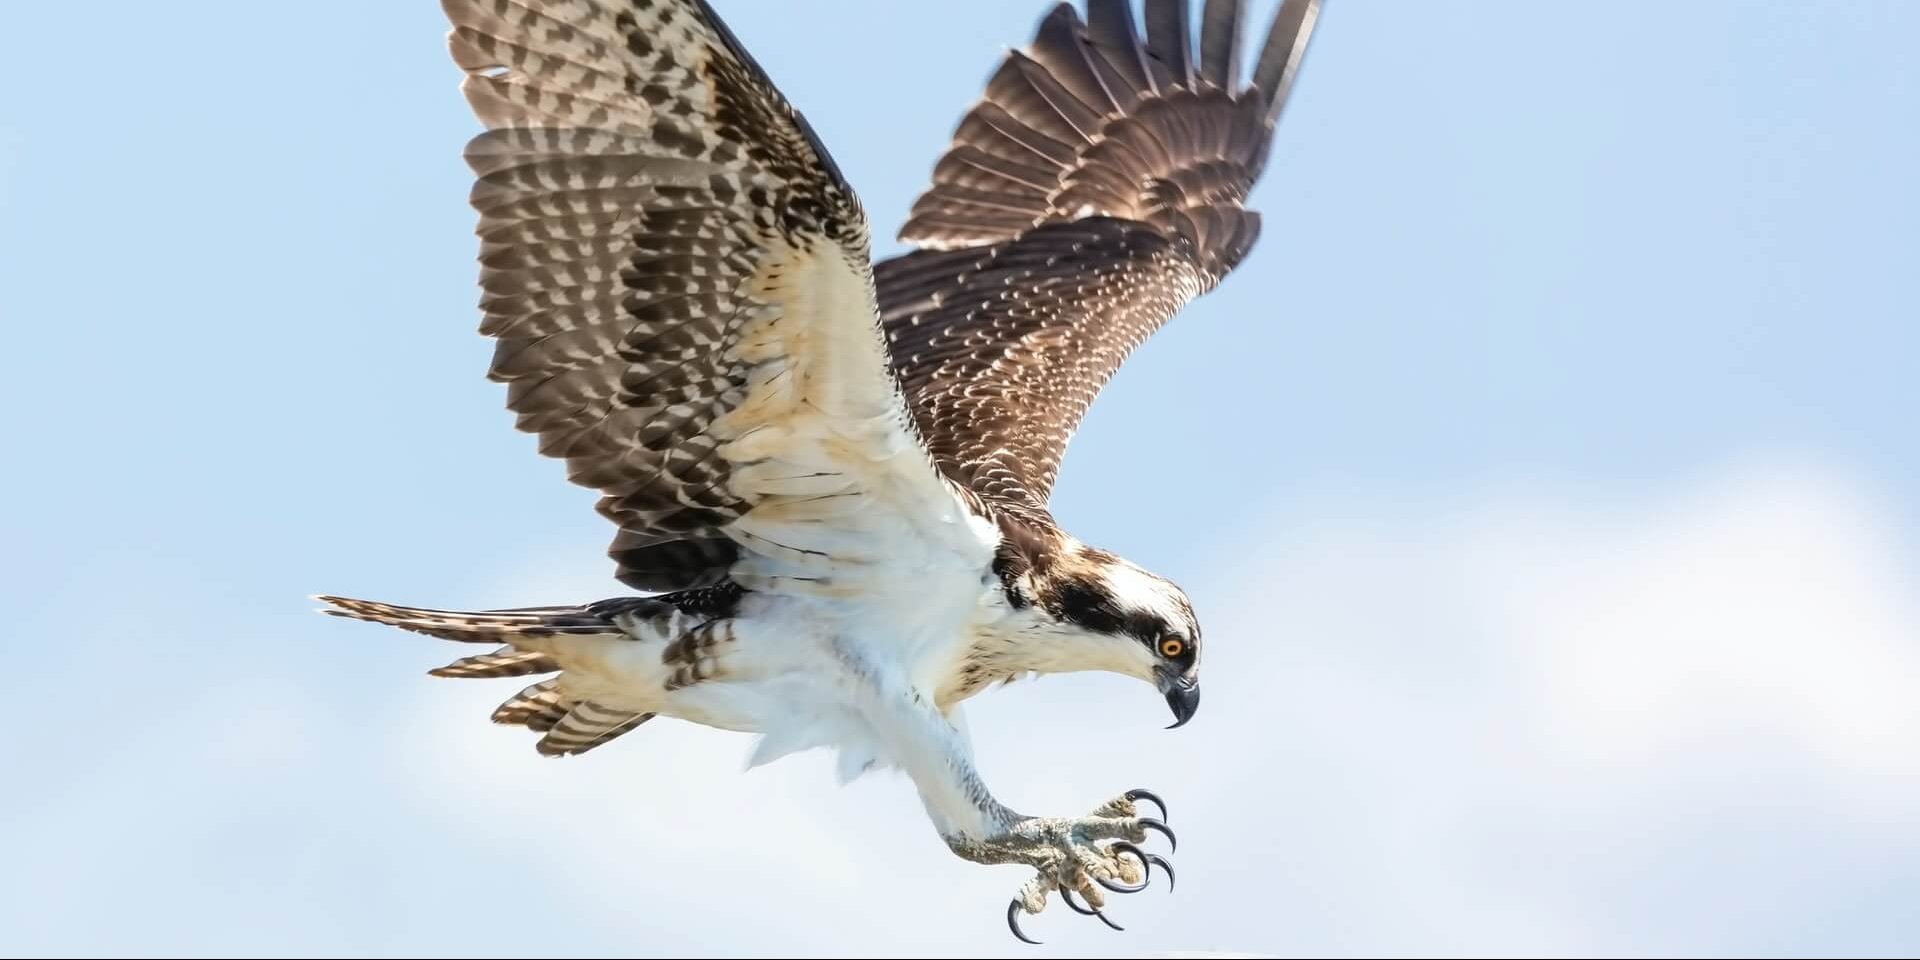 An Osprey coming in for a landing